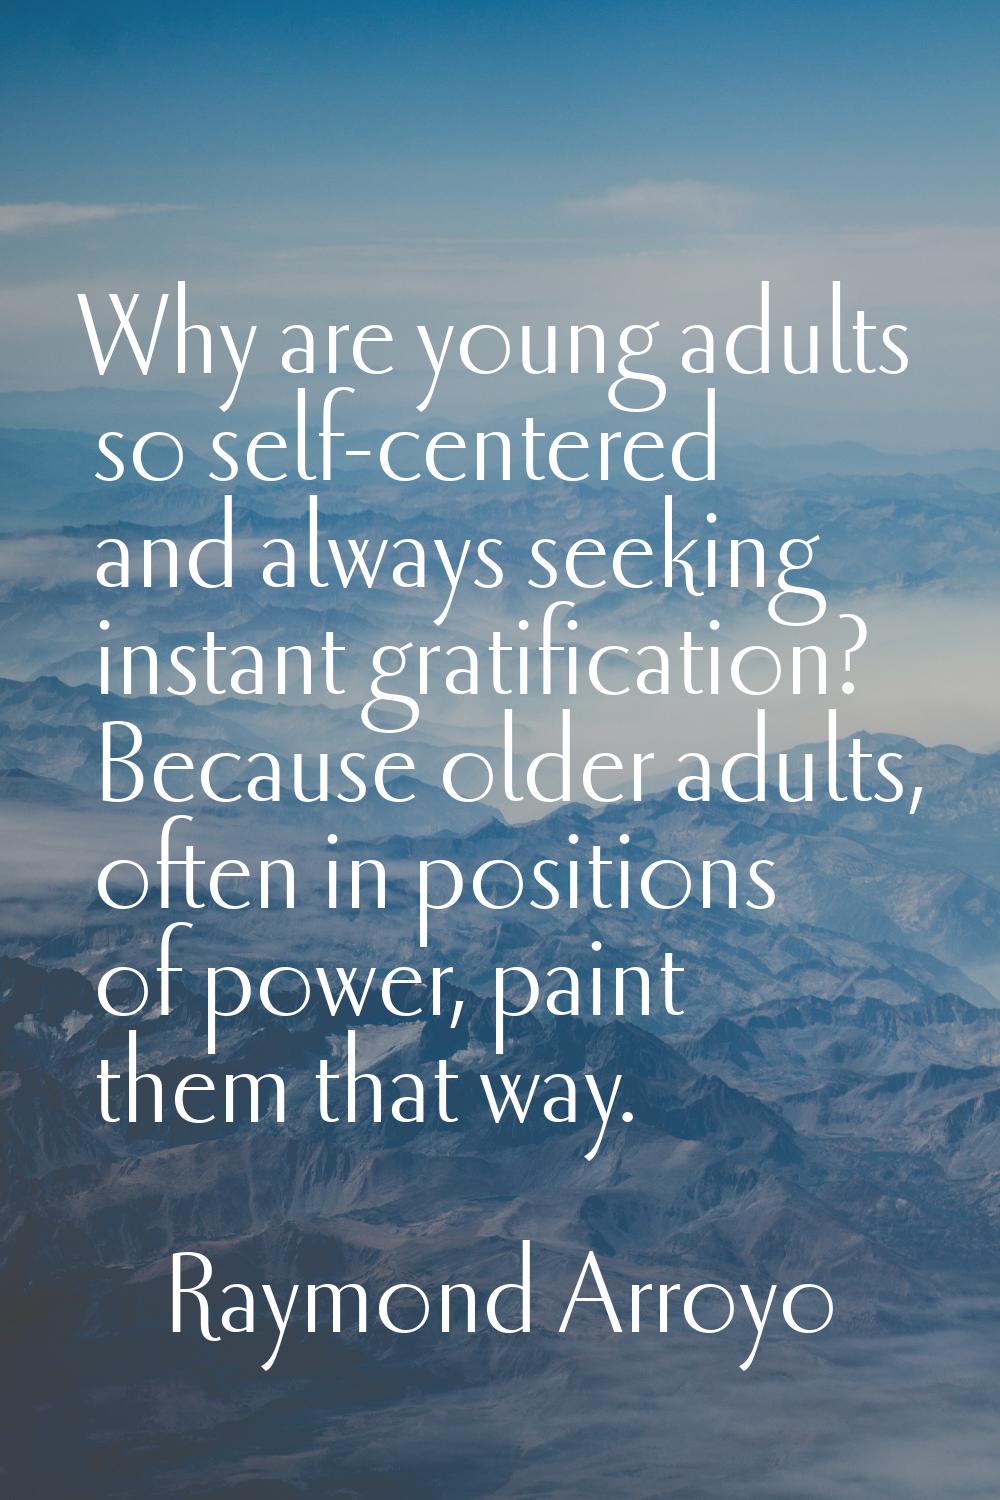 Why are young adults so self-centered and always seeking instant gratification? Because older adult